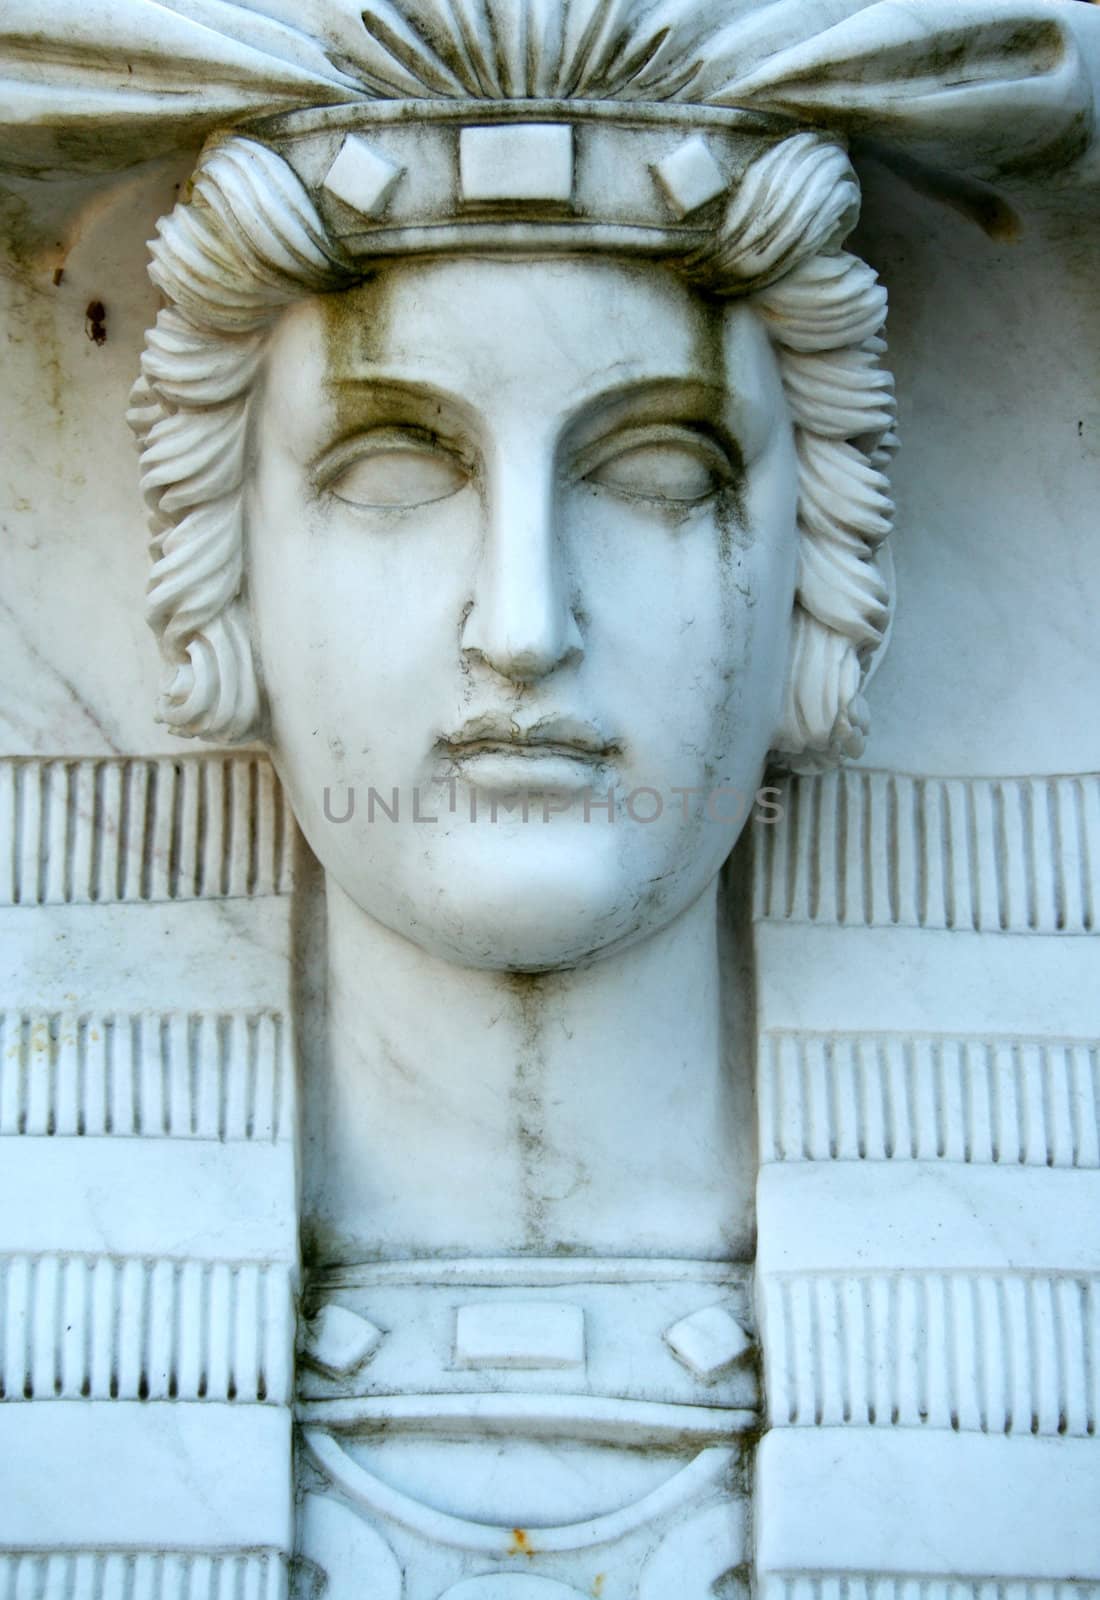 A close up of a statue face